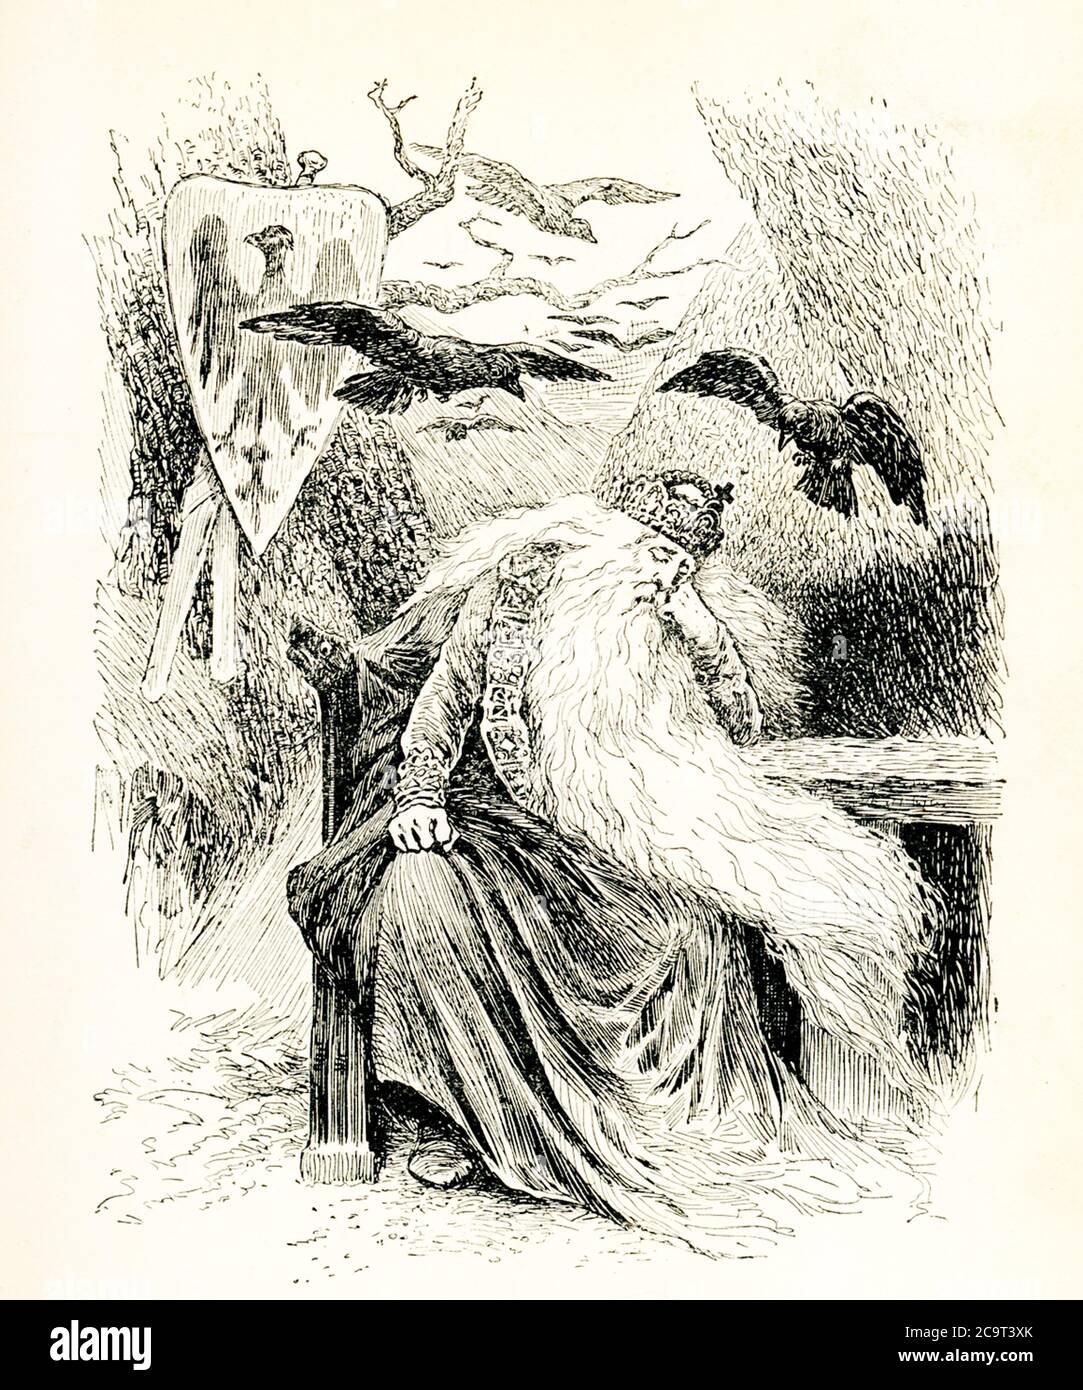 This illustration shows the sleeping Barbarossa in the Kyffhauser mountains. Frederick Barbarossa, also known as Frederick I, was the Holy Roman Emperor from 2 January 1155 until his death 35 years later. According to legend, the emperor Barbarossa remains sleeping under the Kyffhäuser Mountain and will someday rise again when Germany needs his leadership. The Kyffhäuser Monument,  also known as Barbarossa Monument, is an Emperor William monument within the Kyffhäuser mountain range in the German state of Thuringia. Stock Photo